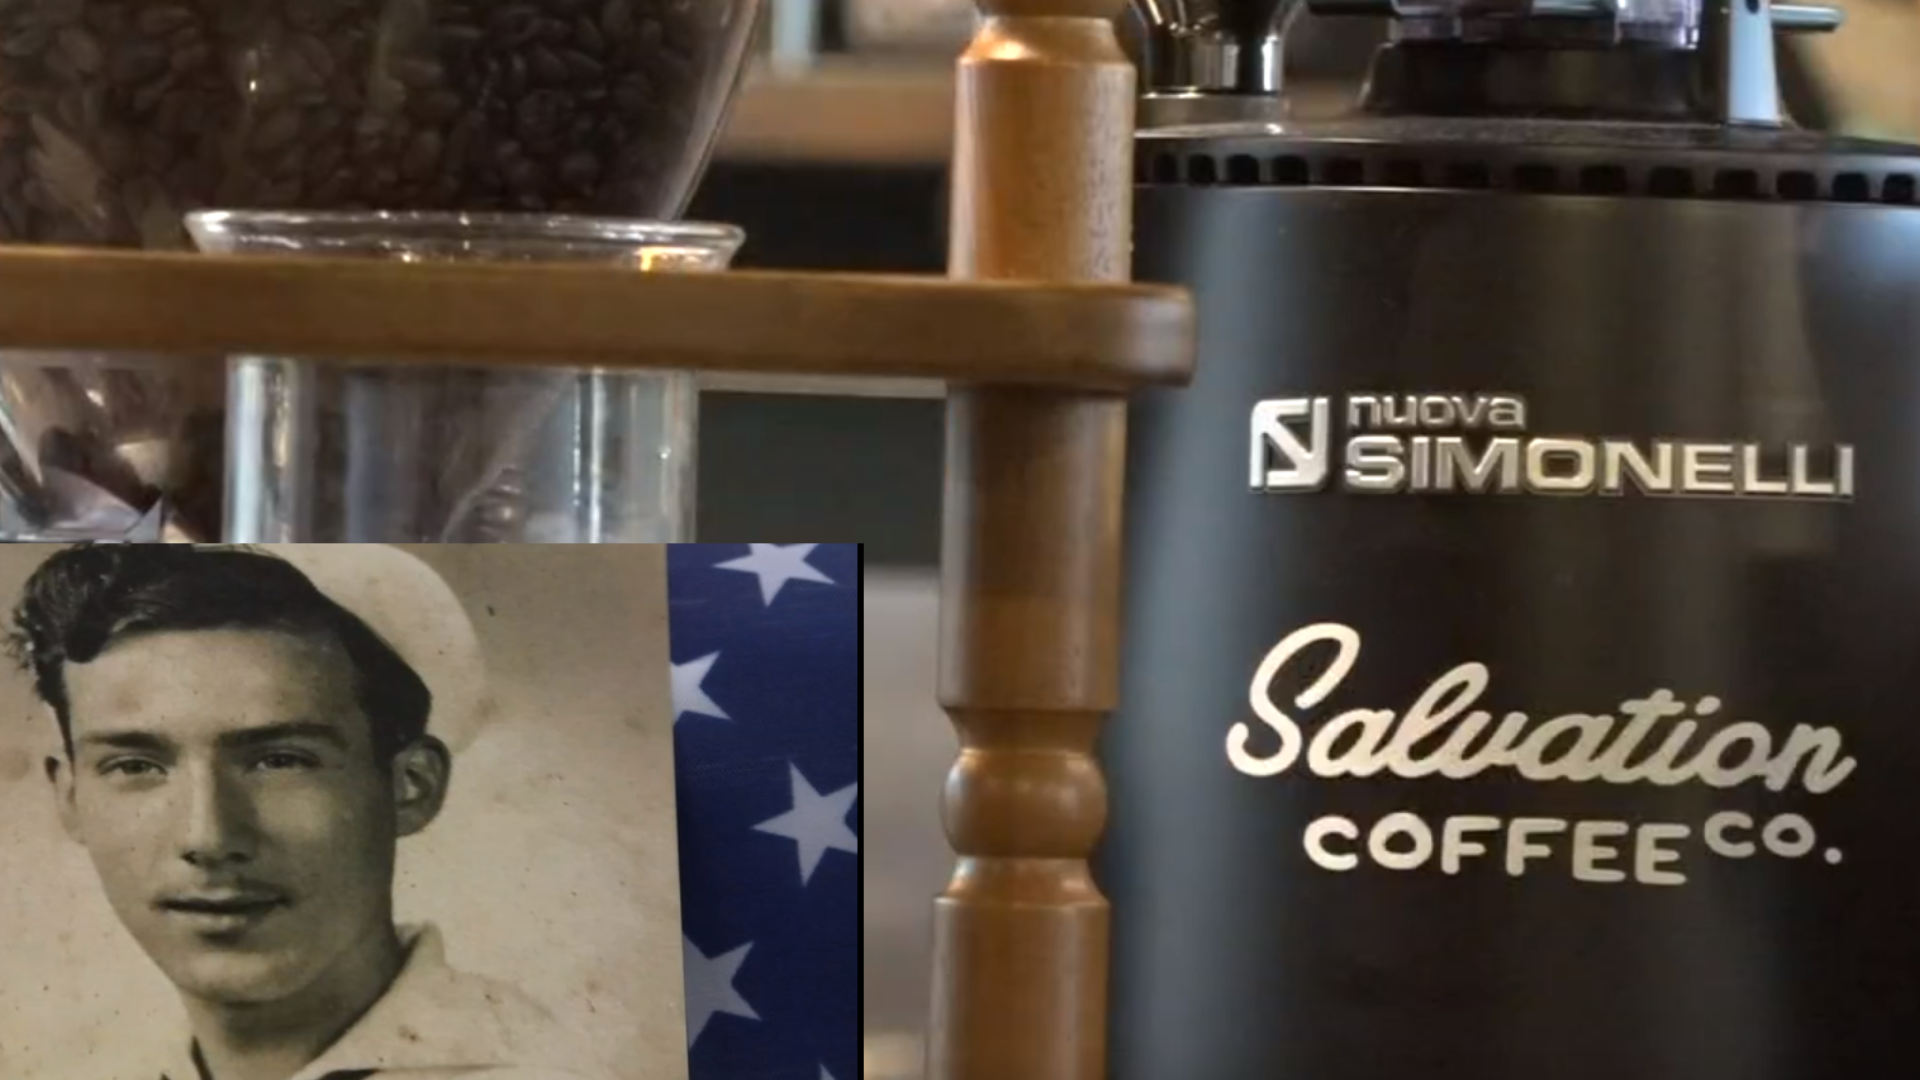 Bob Sargent is a 94-year-old WWII veteran and he has no plans of slowing down.  His next venture is barista trainng.